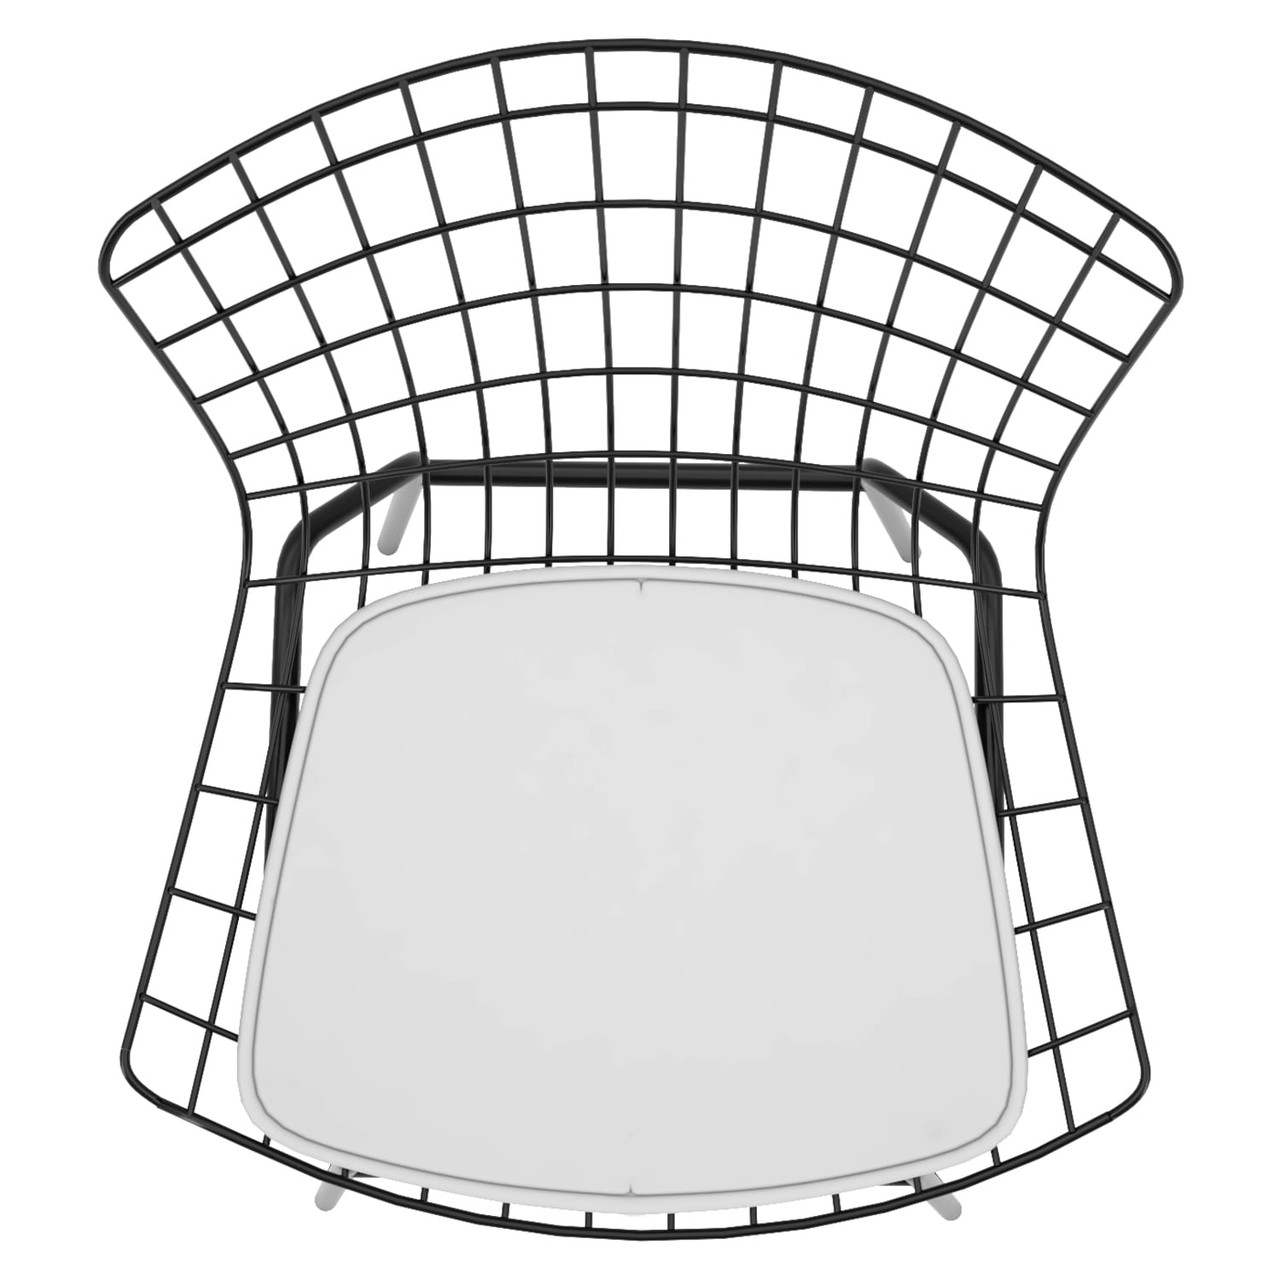 Madeline Chair with Seat Cushion in Black and White